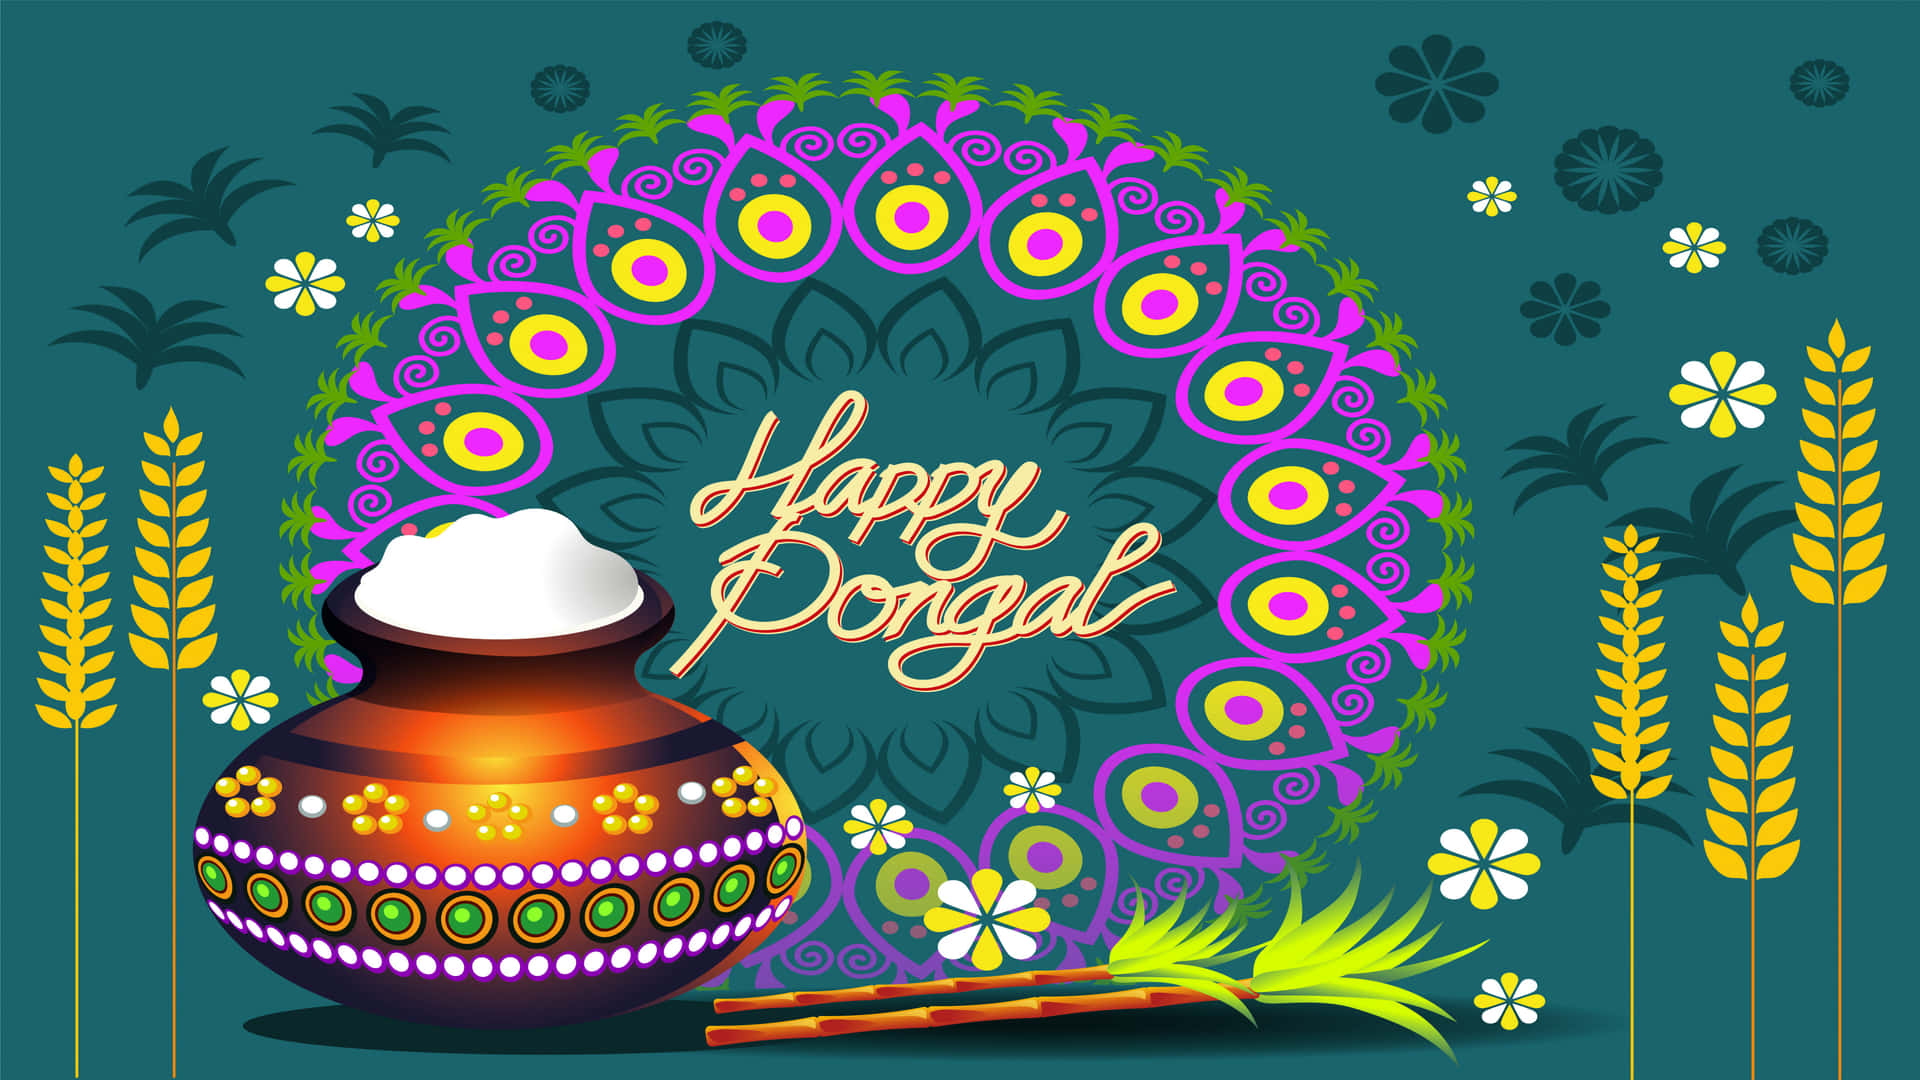 Pongal Background Wallpaper